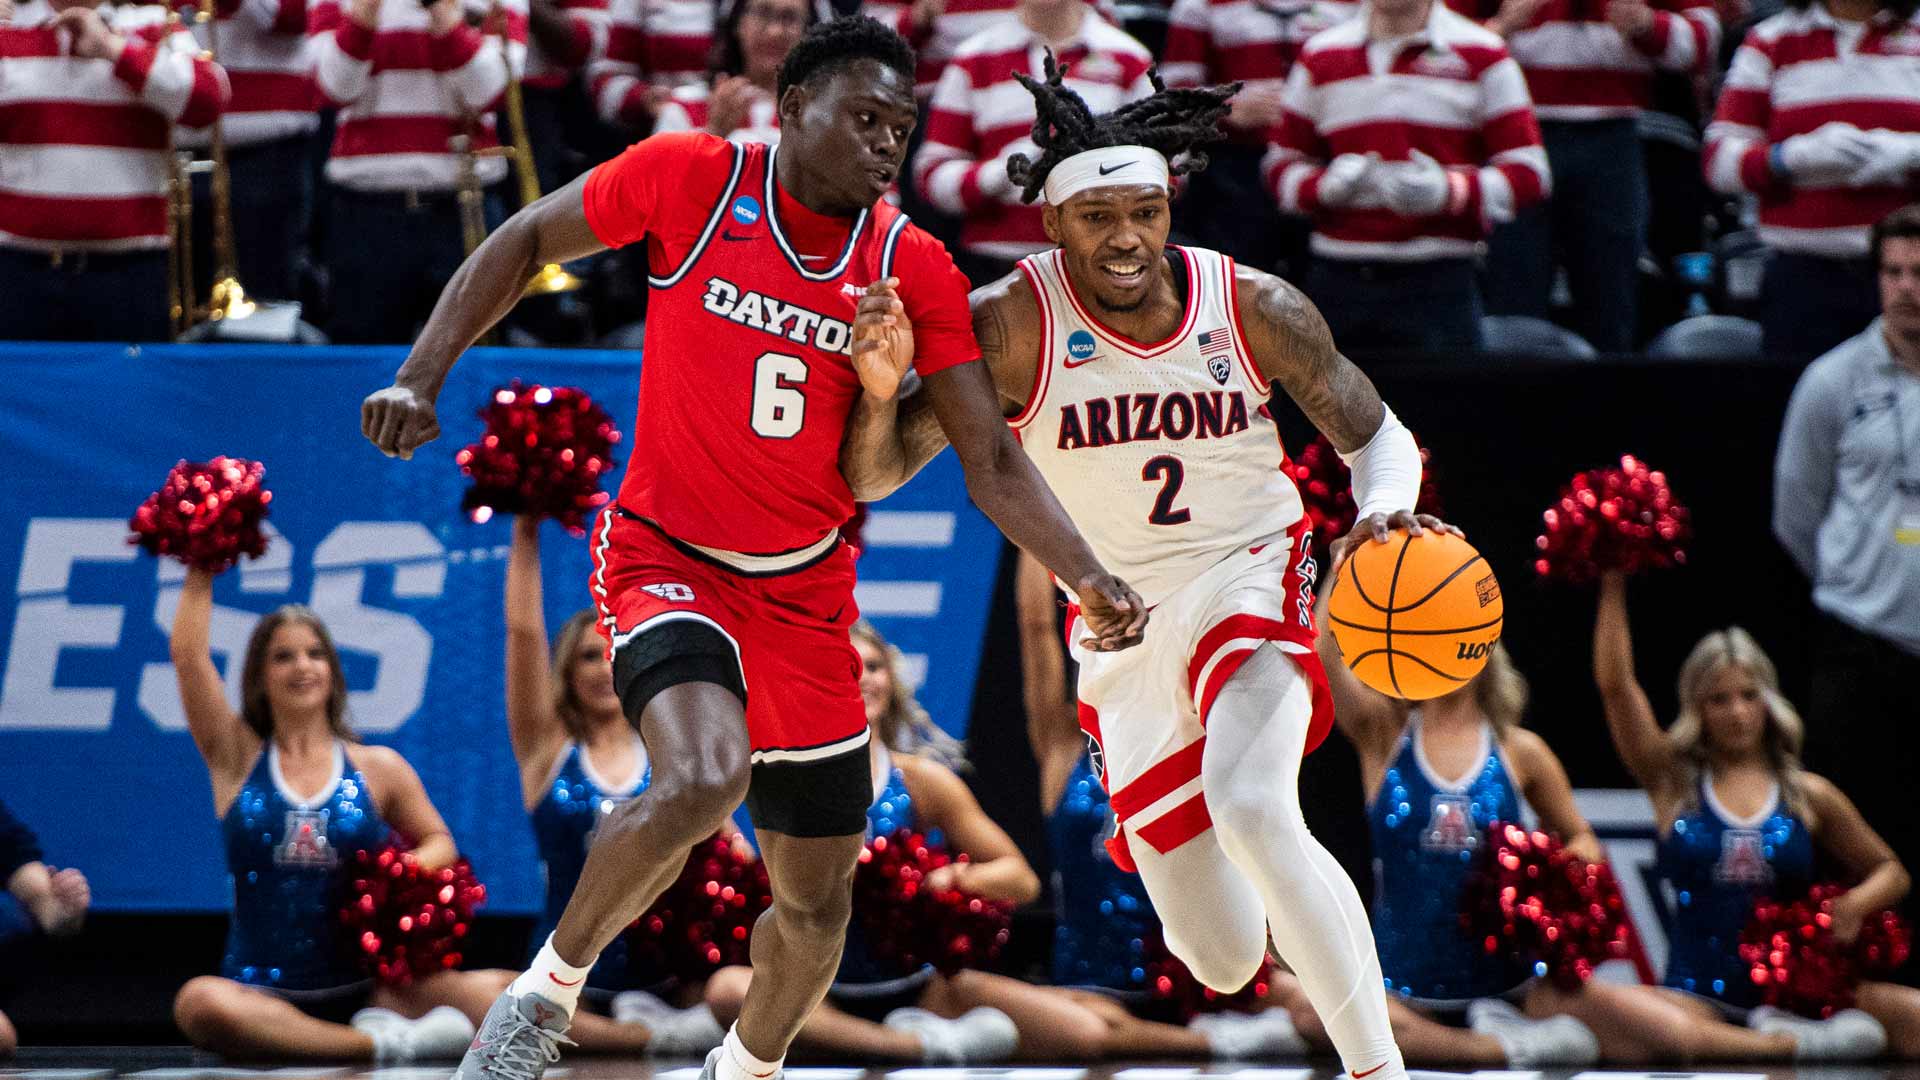 Wildcats lose in the Sweet 16